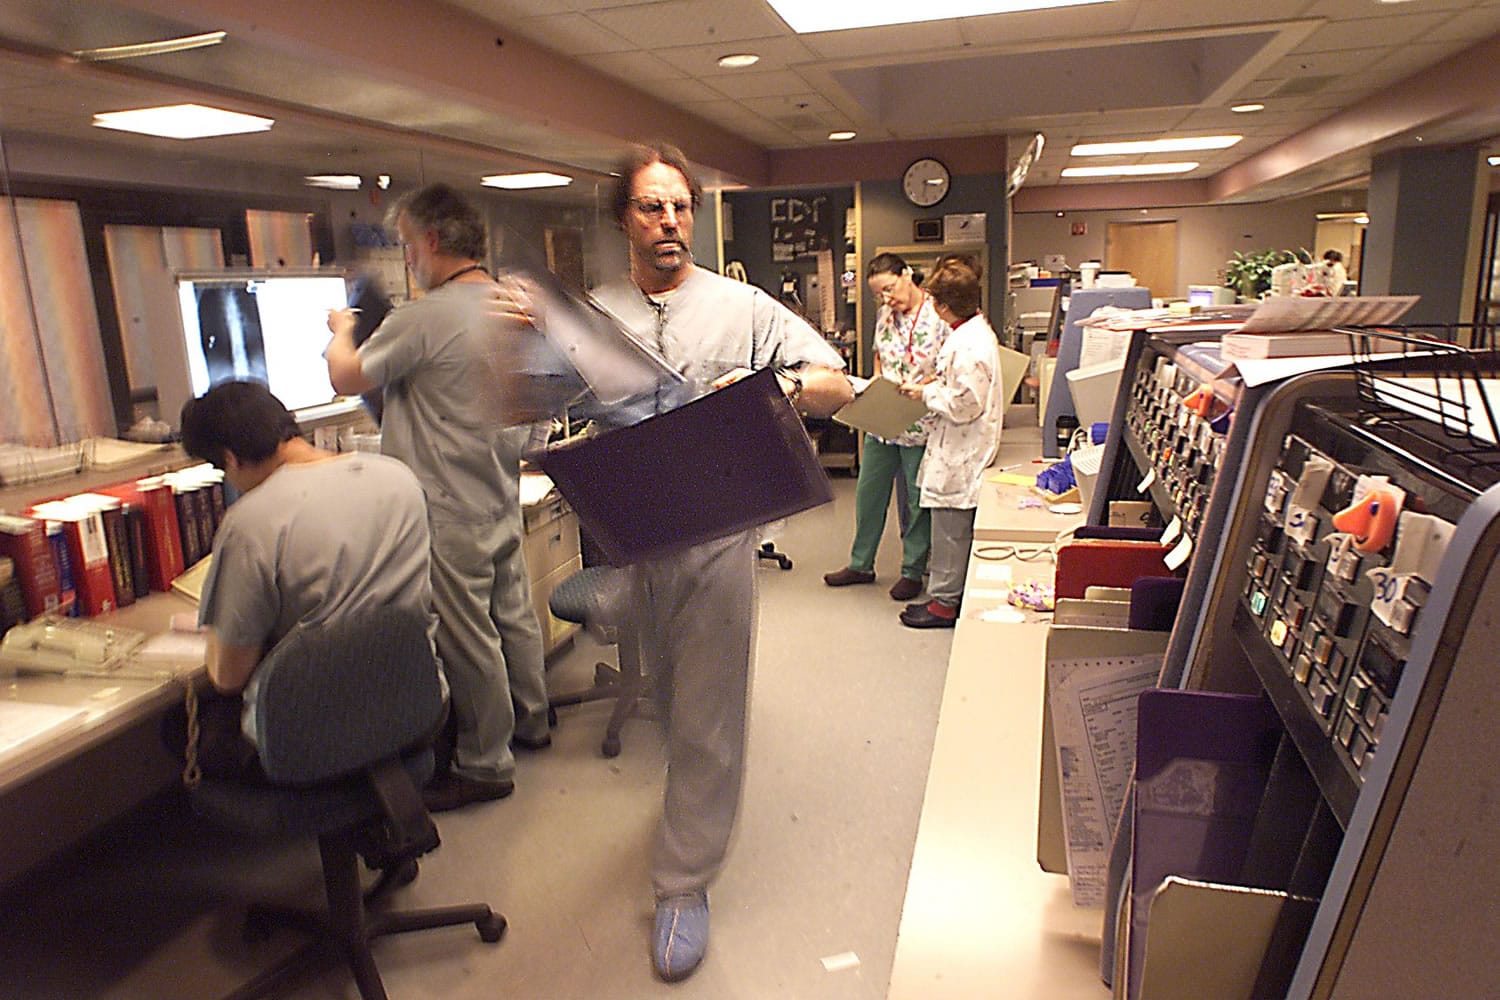 Dr. Marty Bell carries a set of patient X-rays in the emergency room of then-Southwest Washington Medical Center in 2000. Bell is director of emergency services at the now PeaceHealth Southwest Medical Center.